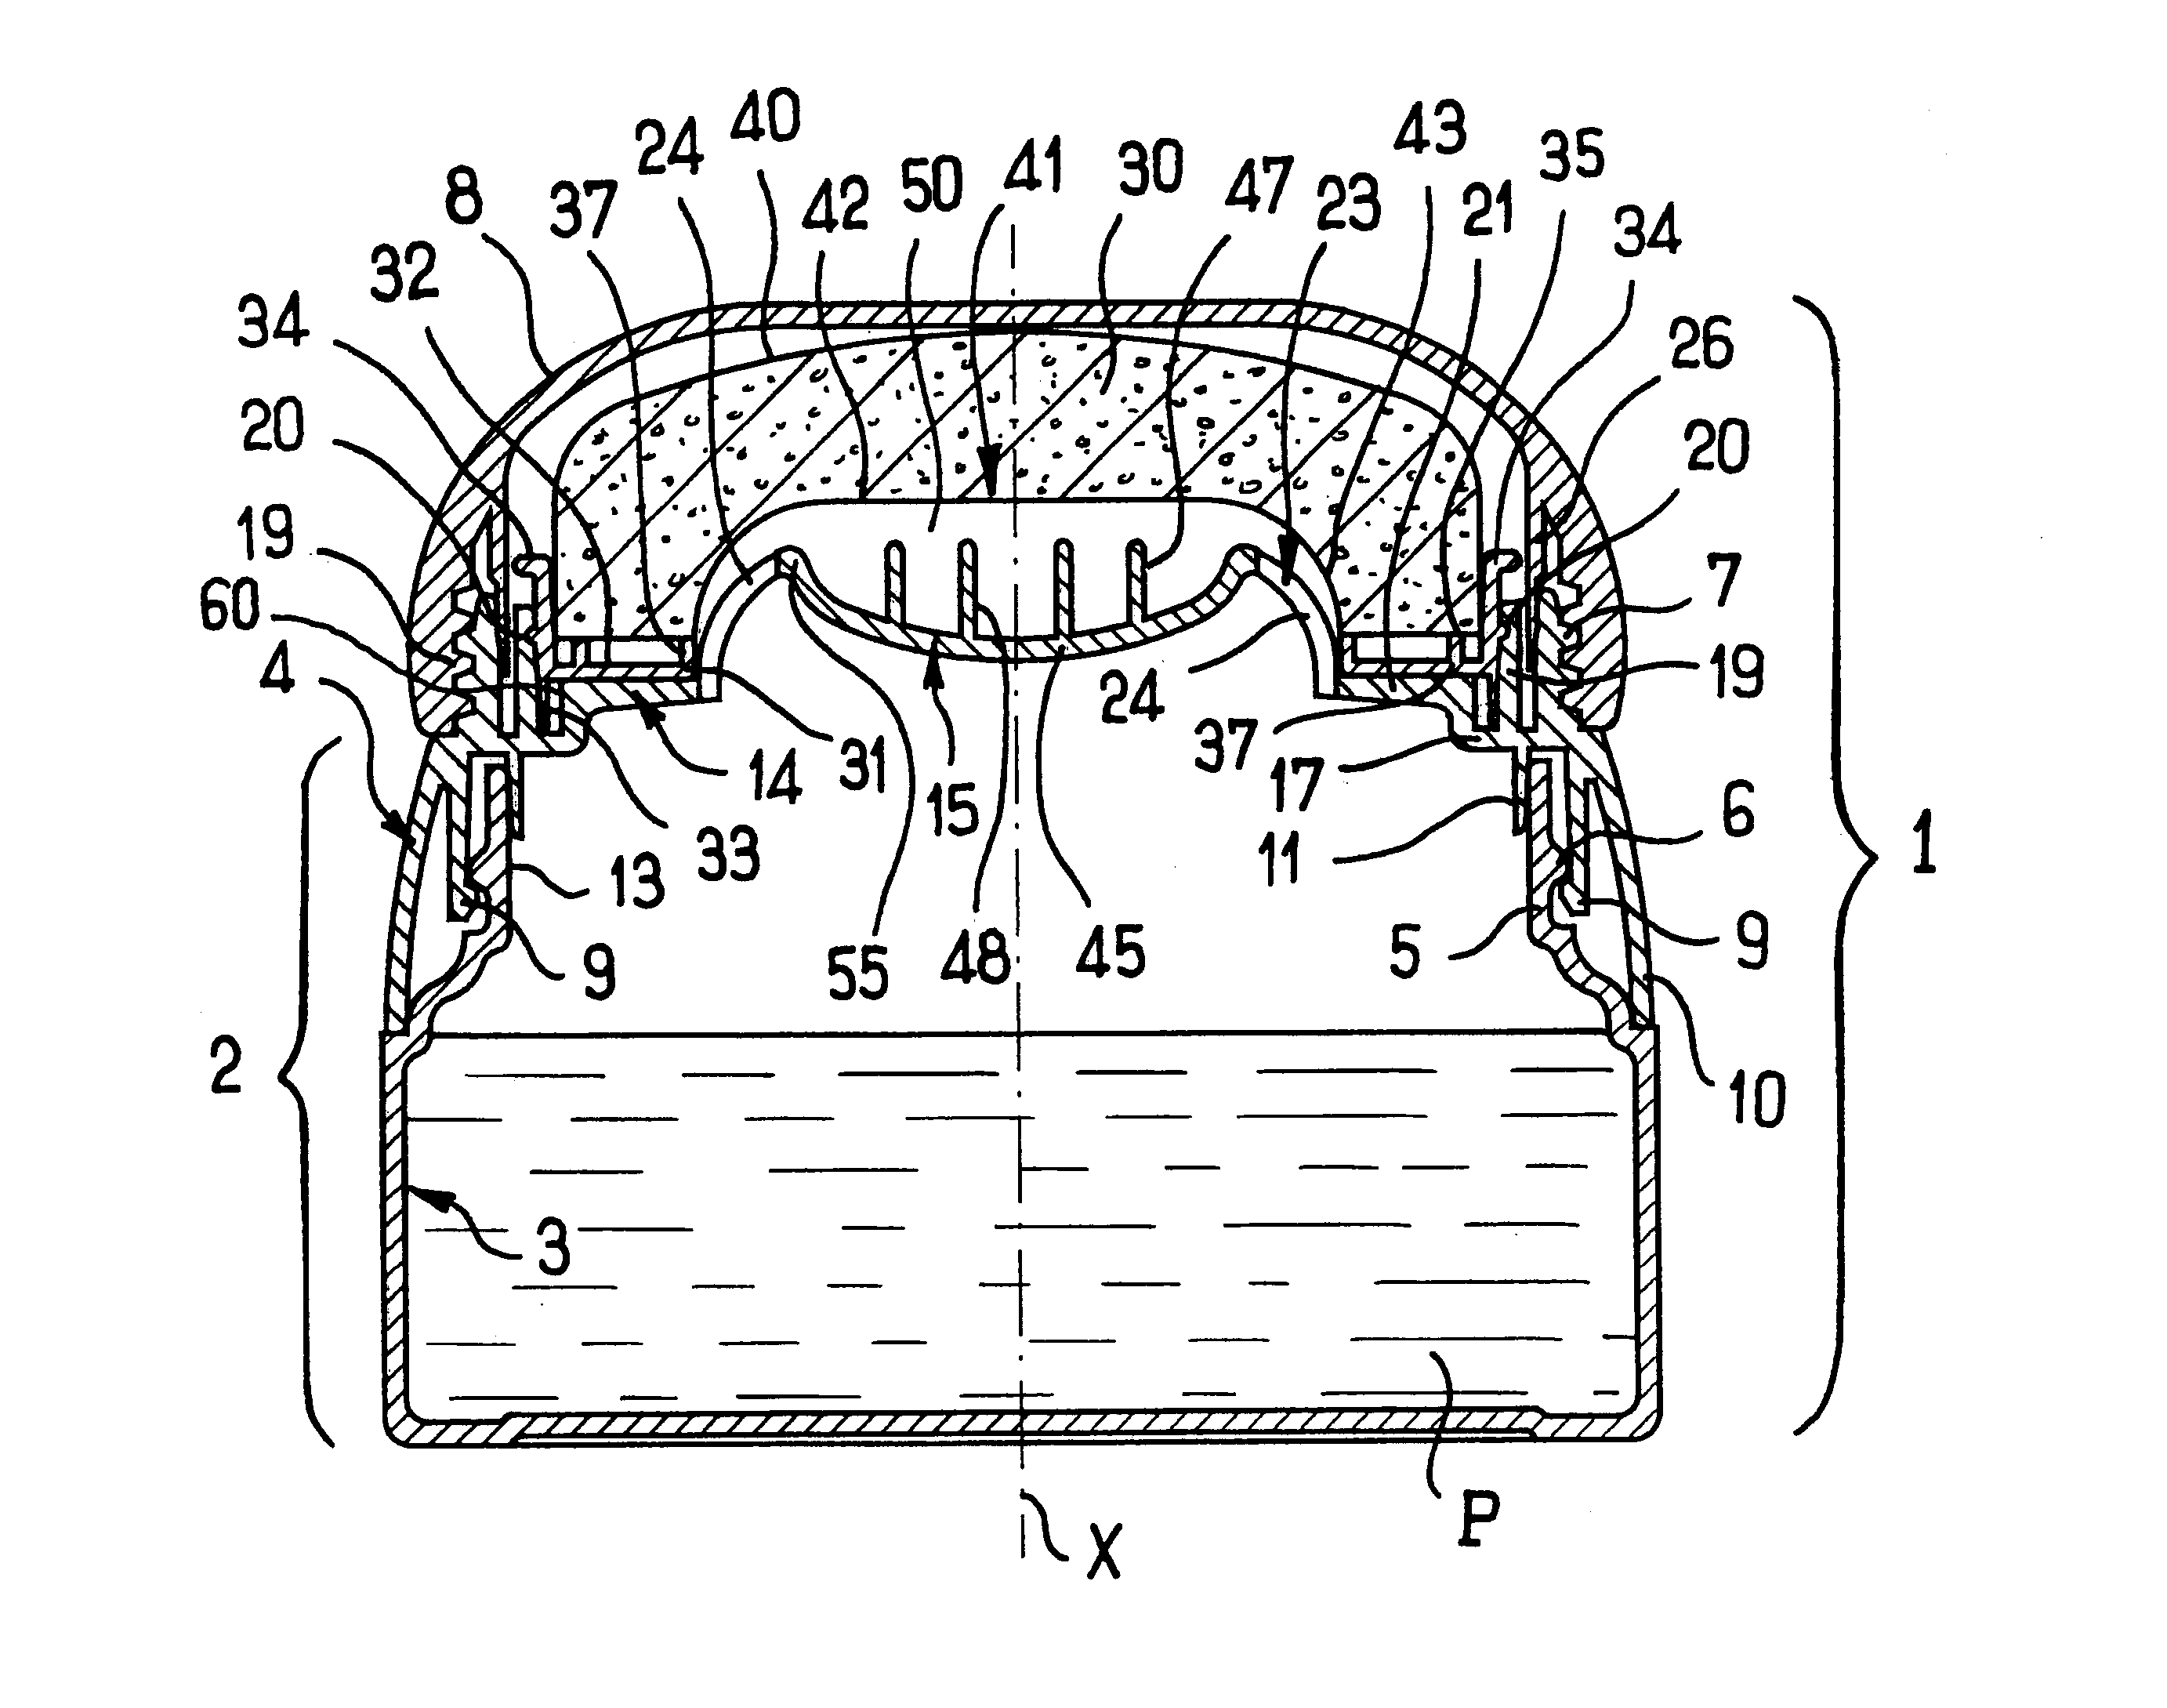 Packaging and applicator device including an element forming an intermediate reservoir